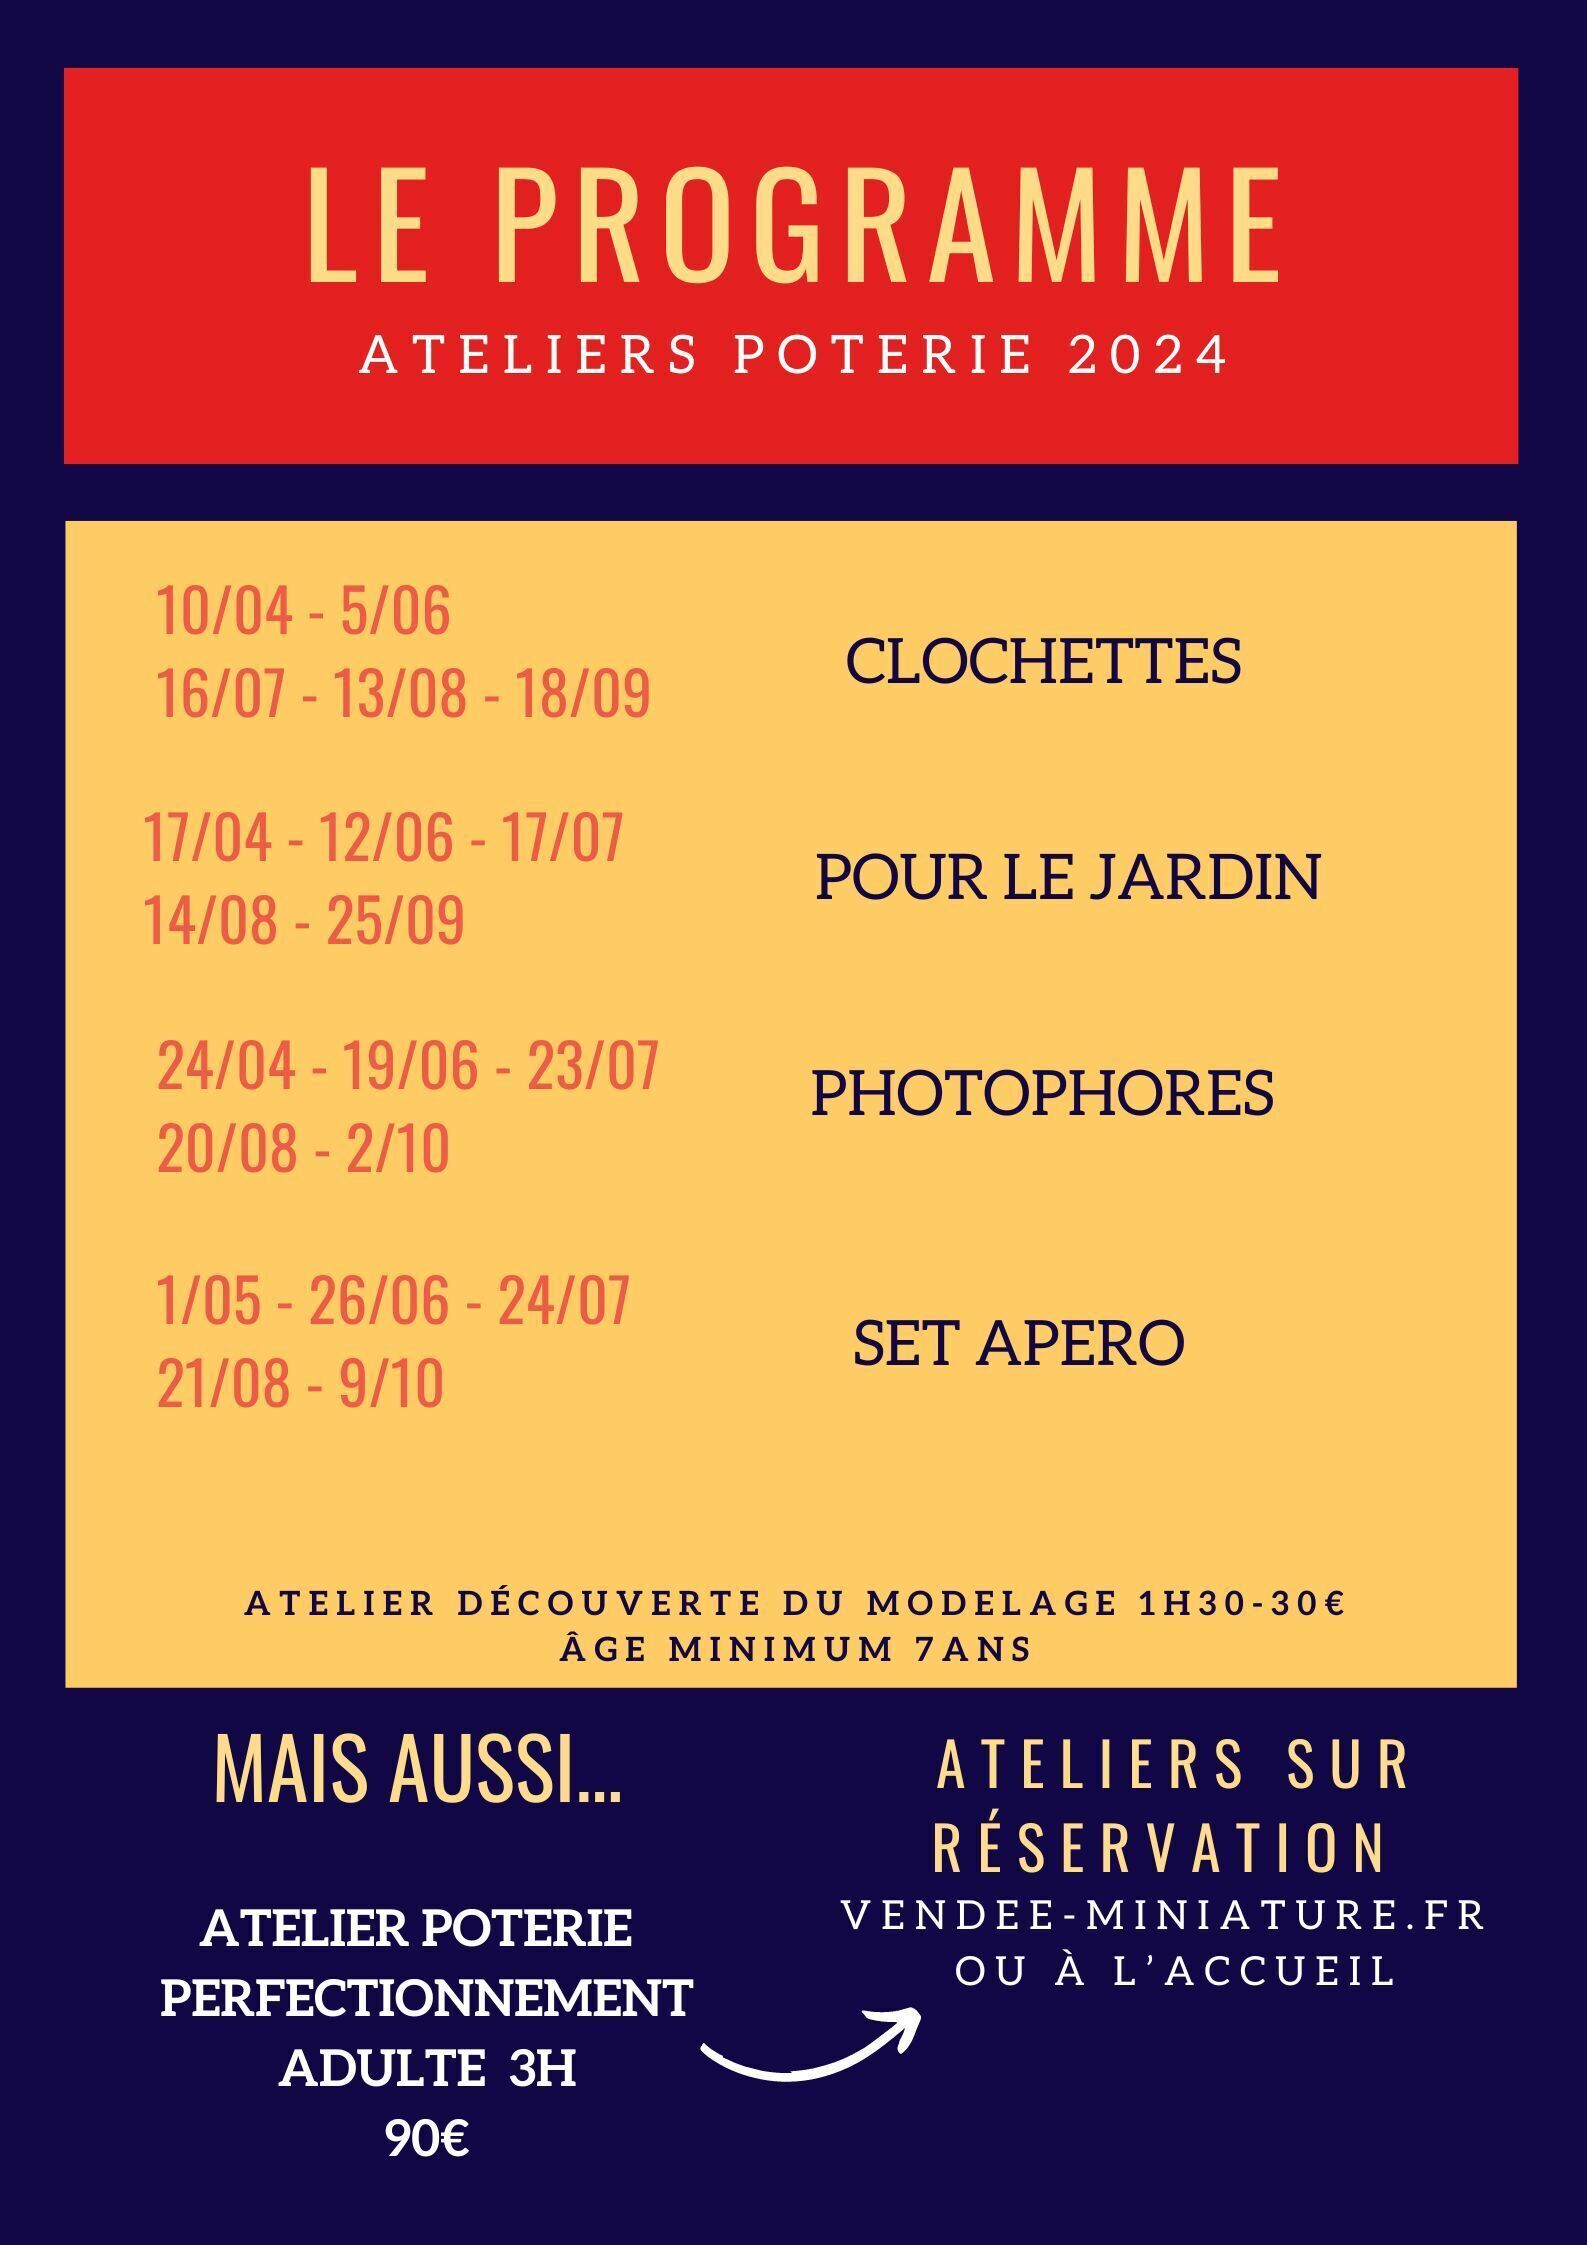 atelier poterie planning 2024